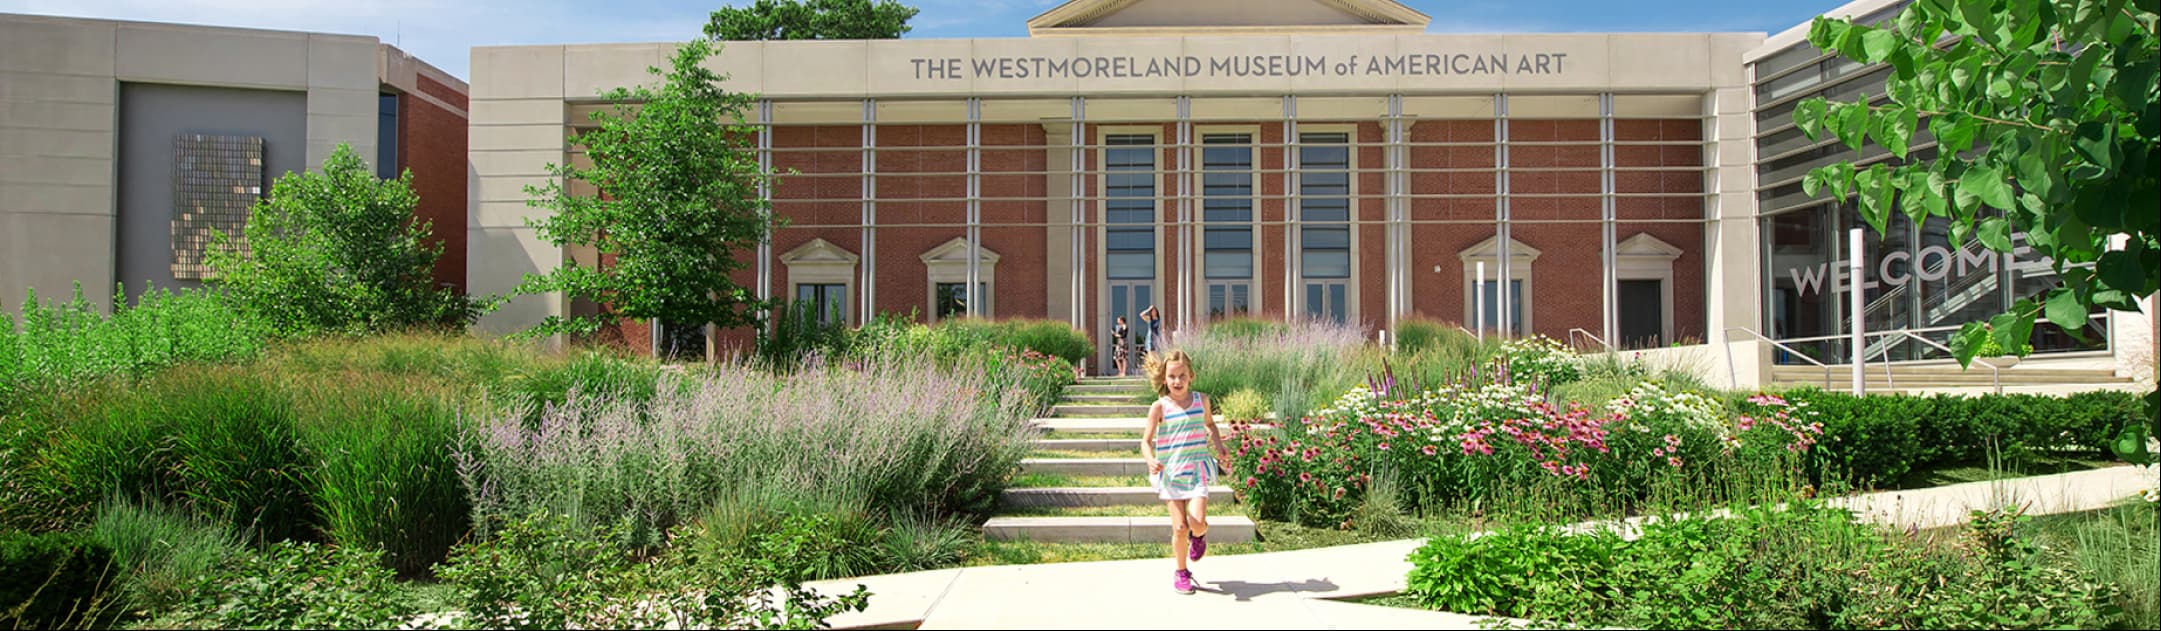 Girl running in front of The Westmoreland Museum